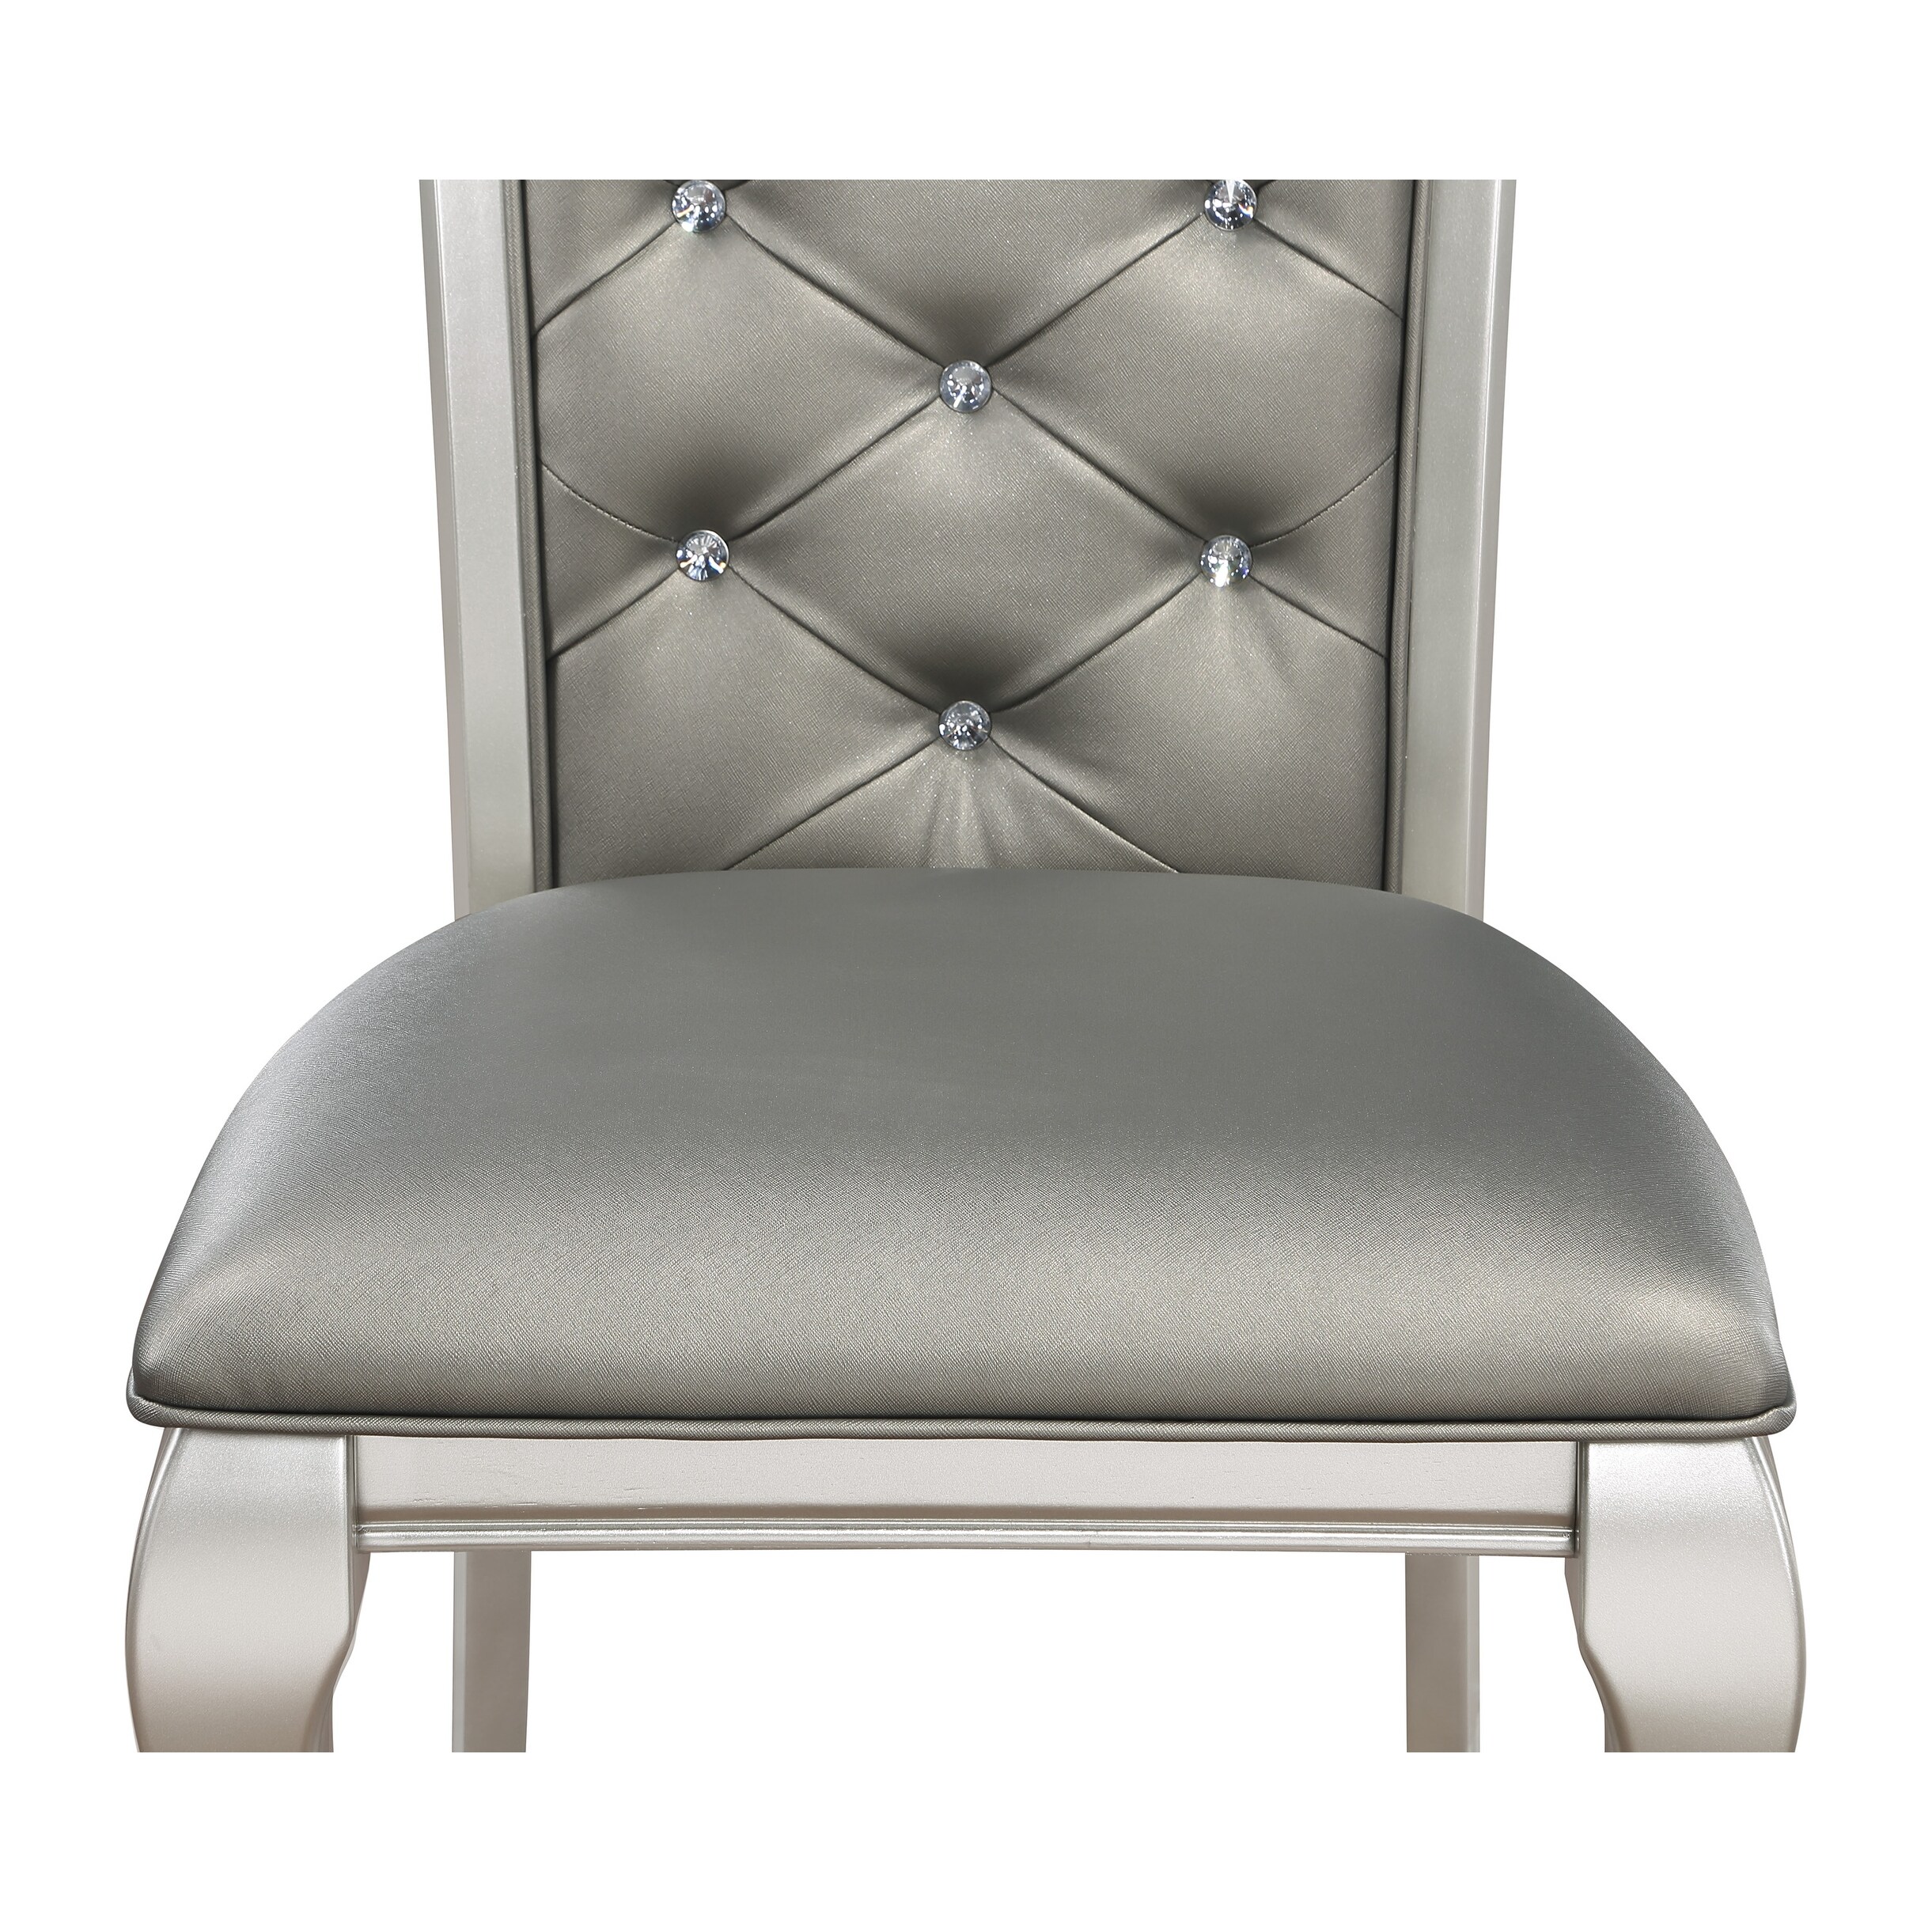 Modern Luxurious Upholstered King Louis Side Chairs Dining Chair(Set of 2)  - Bed Bath & Beyond - 38052898